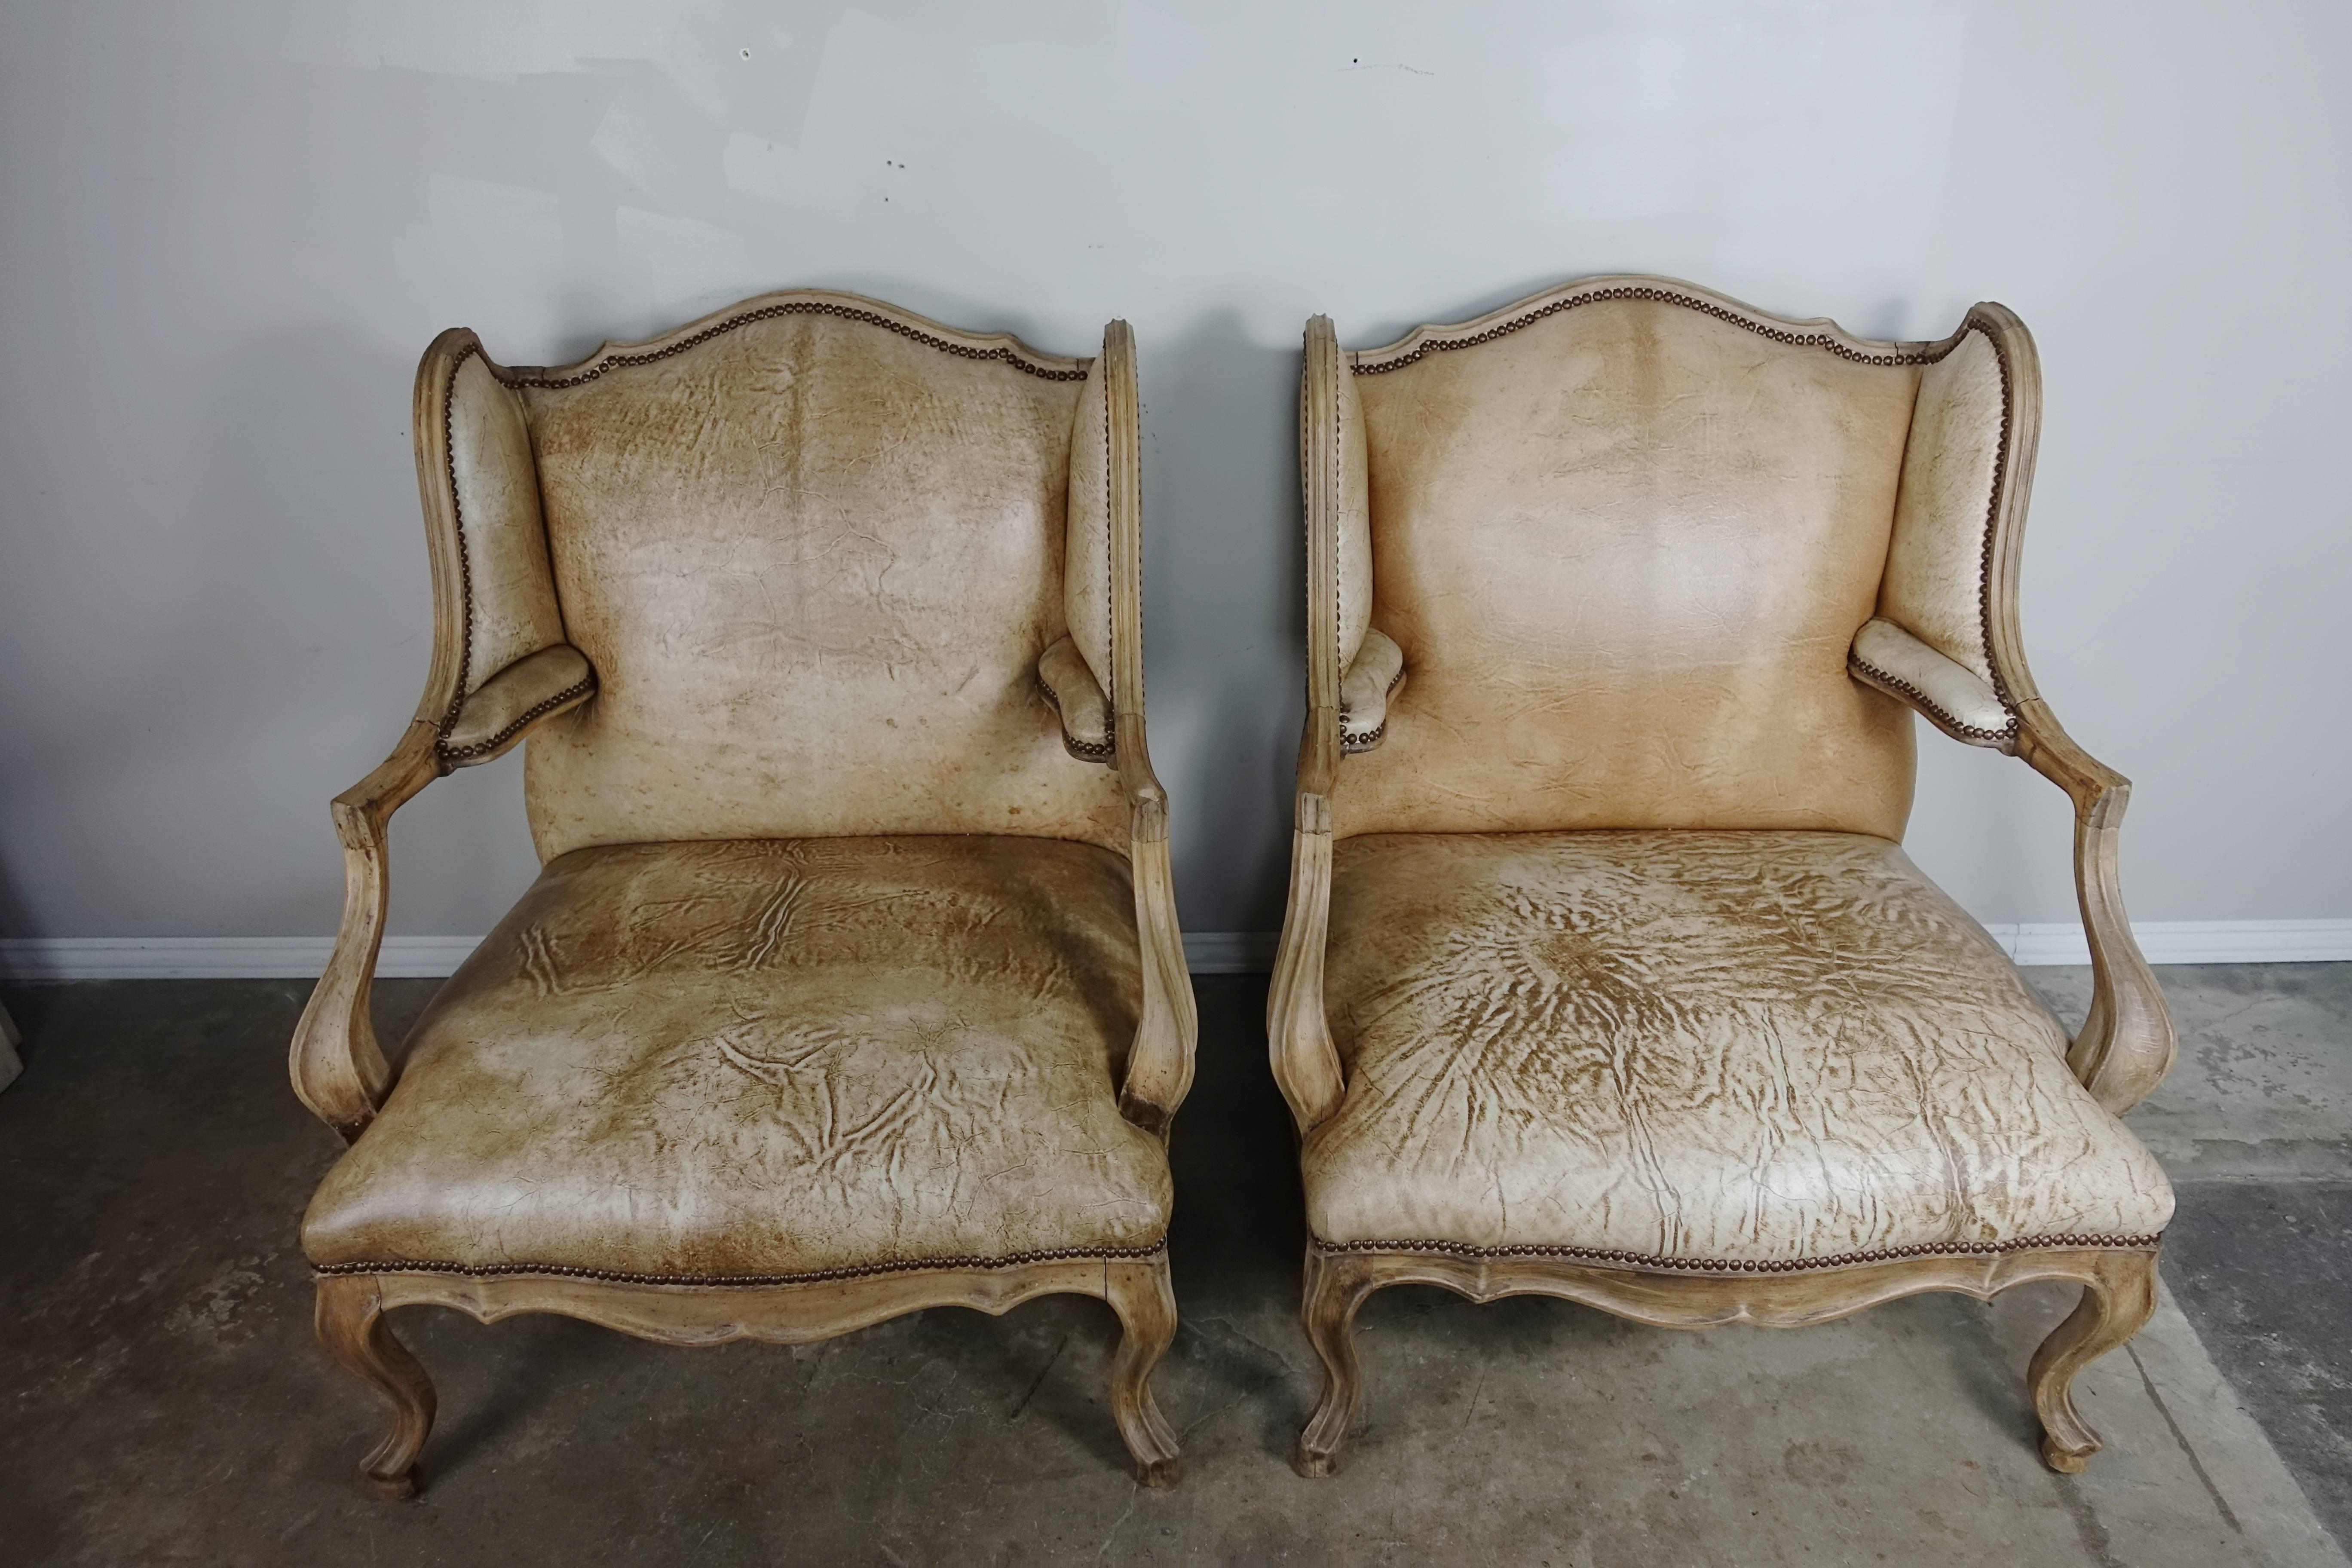 Pair of Antique French Louis XV style wingback Leather armchairs upholstered in unique distressed cow hides with nailhead trim detail.